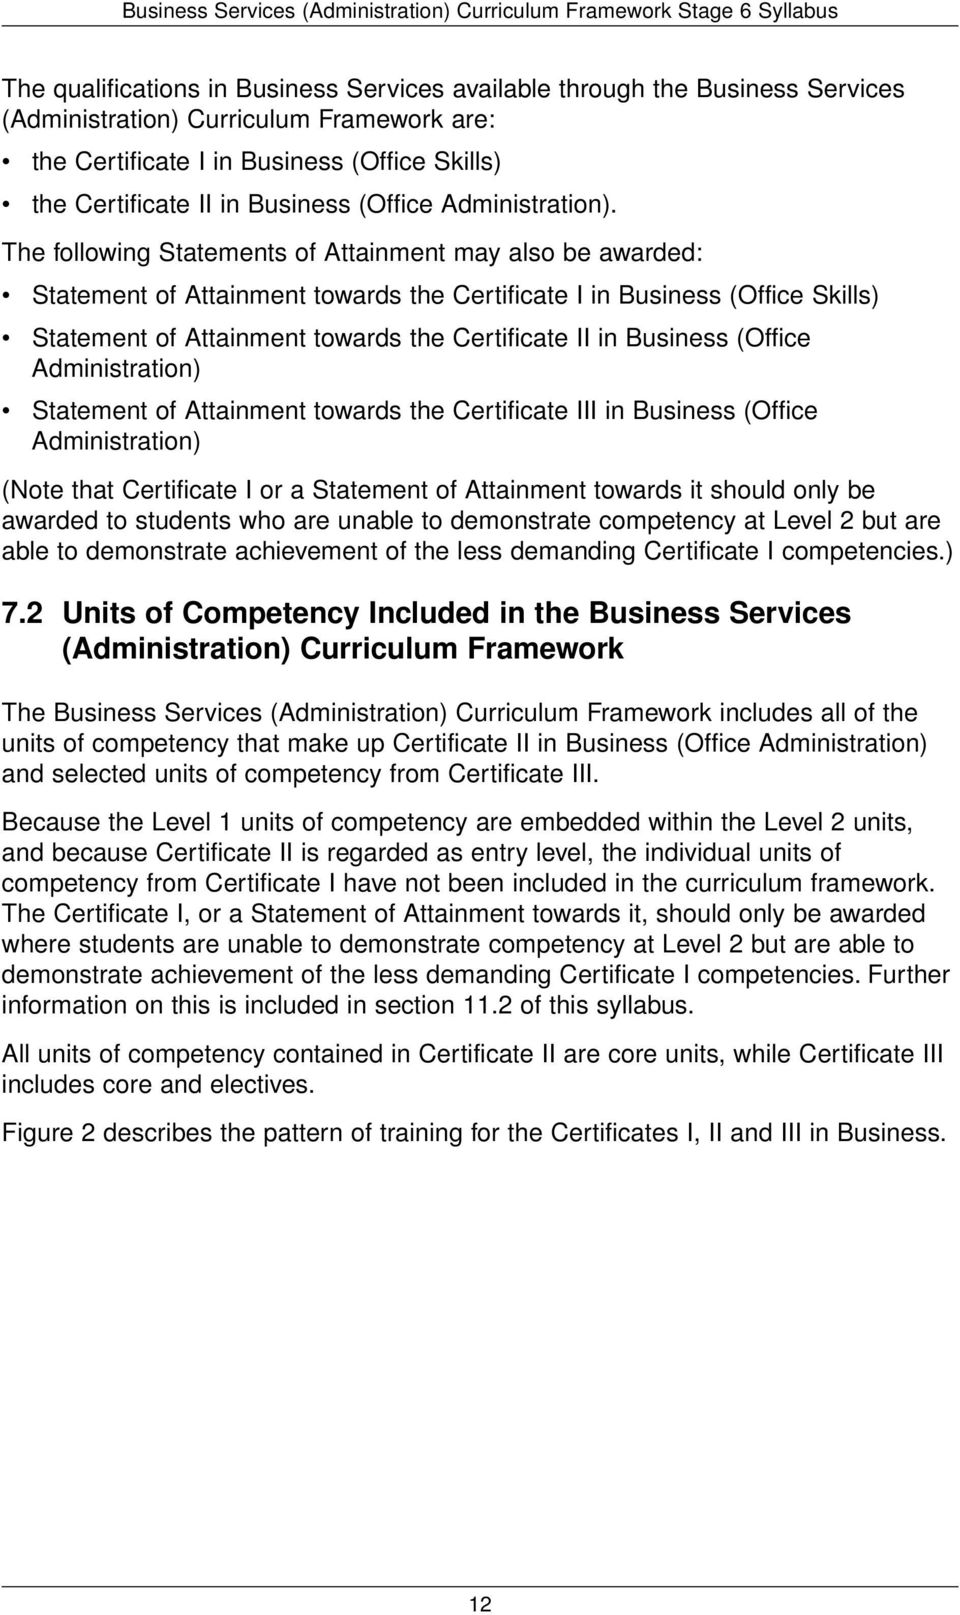 The following Statements of Attainment may also be awarded: Statement of Attainment towards the Certificate I in Business (Office Skills) Statement of Attainment towards the Certificate II in